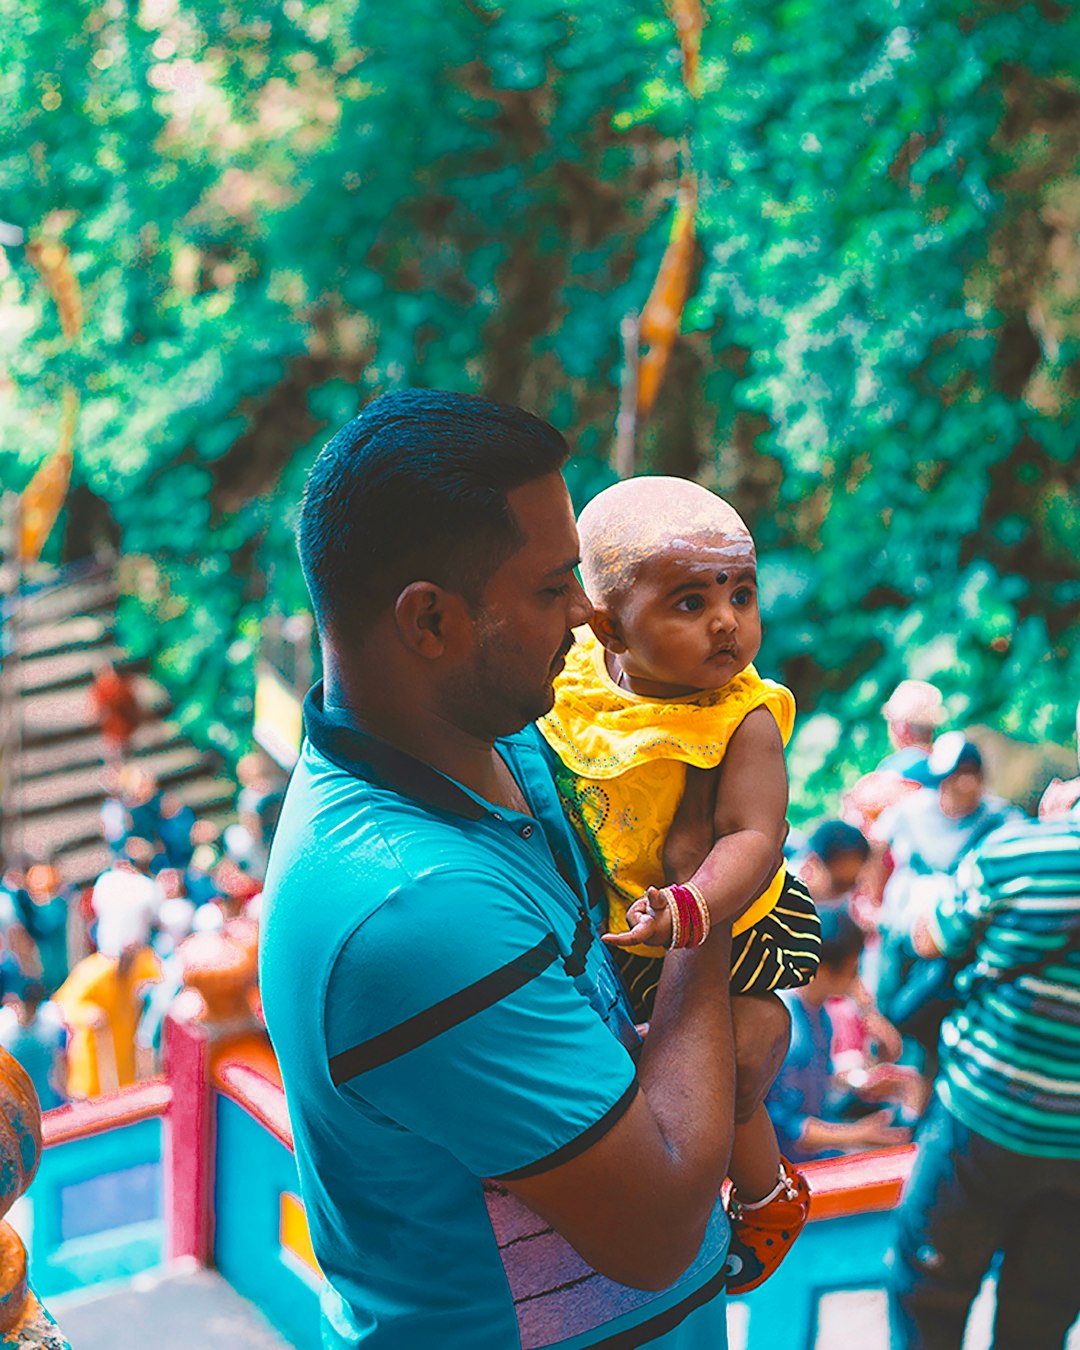 man in blue tank top carrying baby in yellow shirt